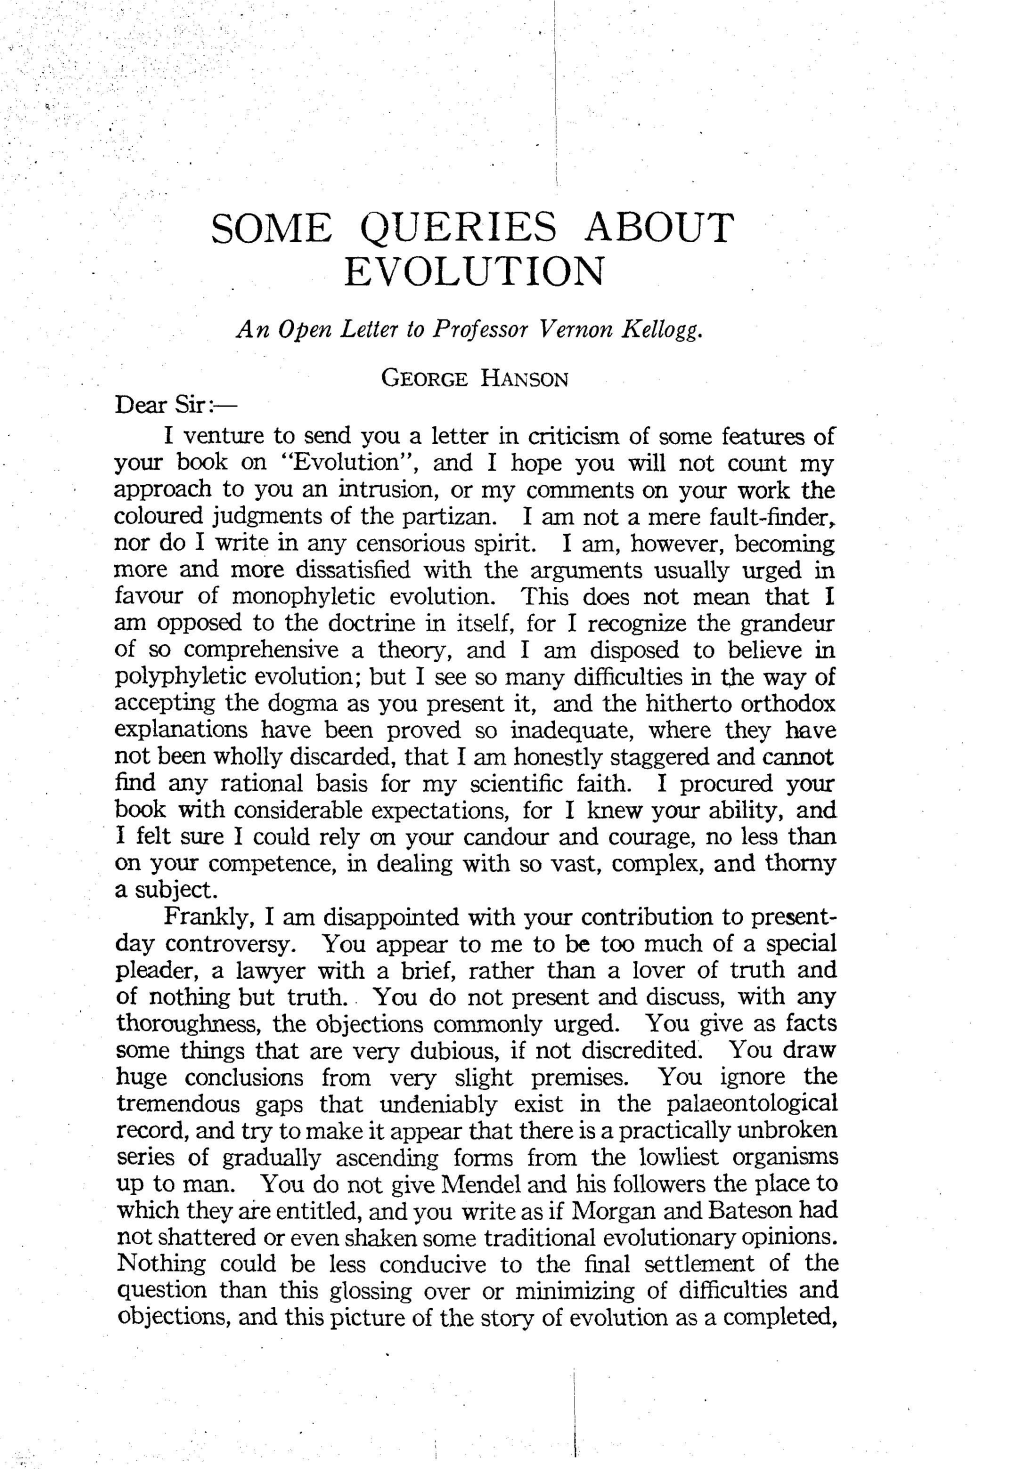 SOME QUERIES ABOUT EVOLUTION an Open Letter to Professor Vernon Kellogg